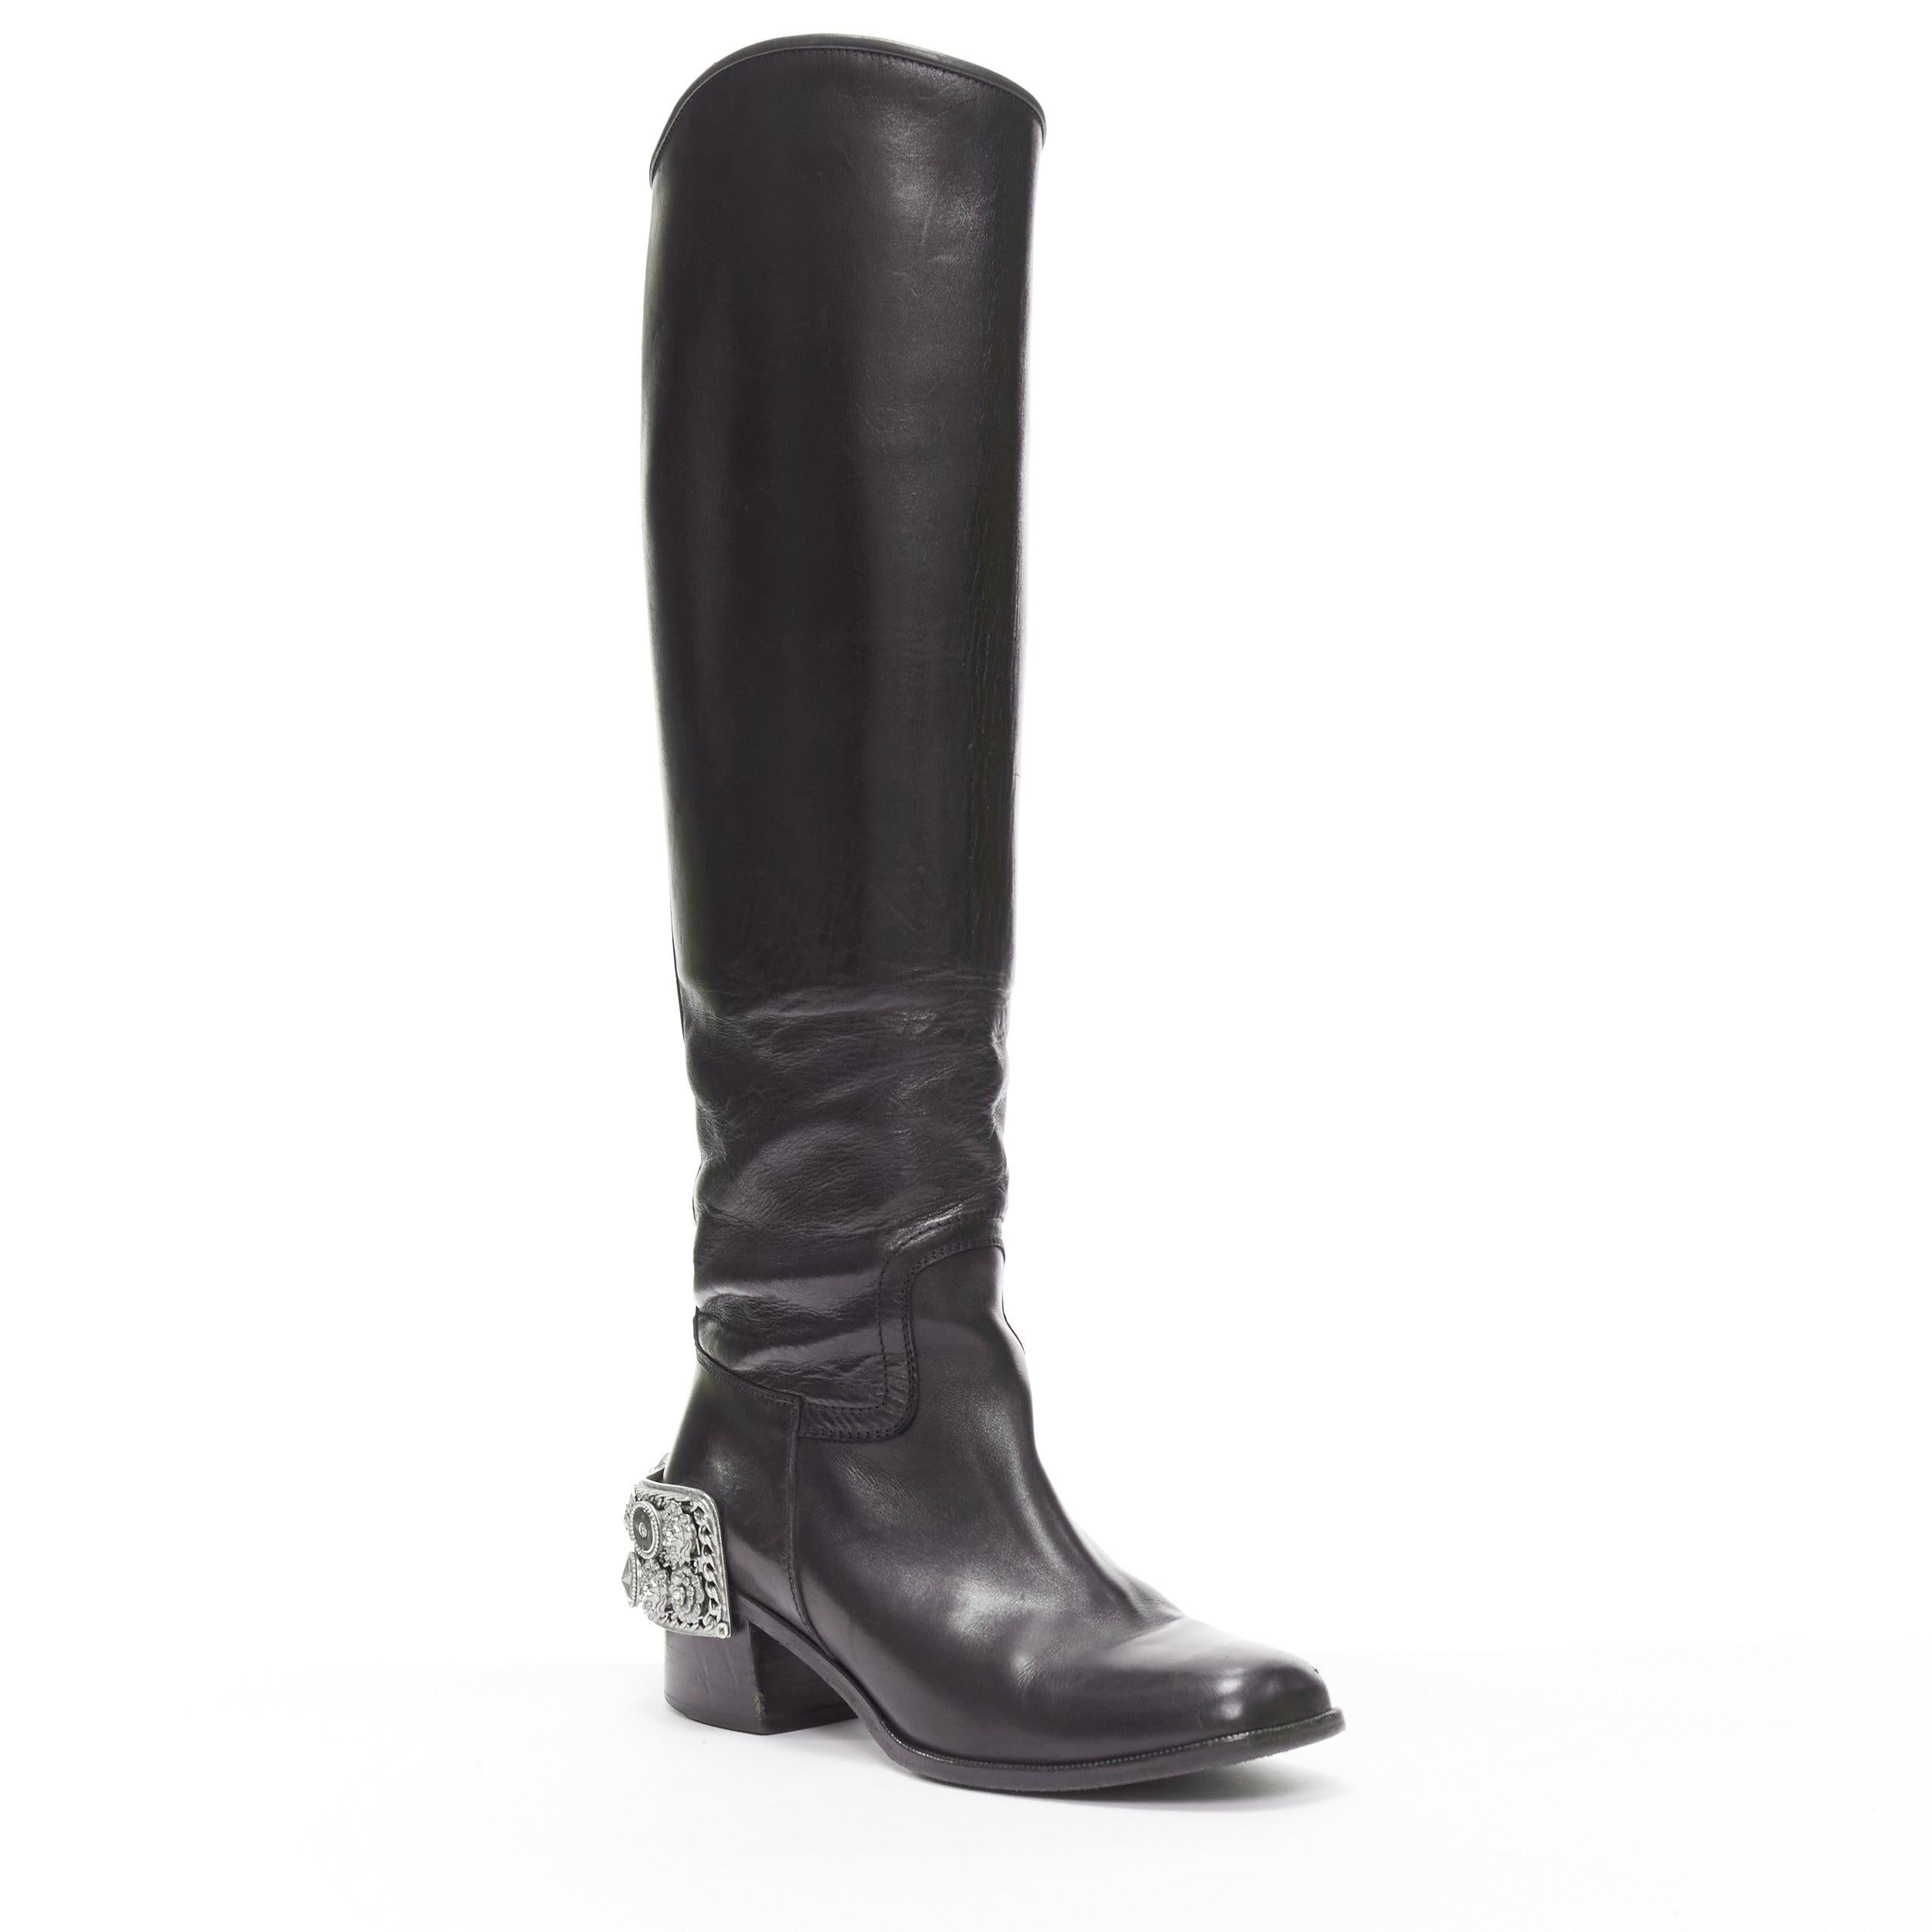 CHANEL 07A Runway silver Lion Camellia Star metal bar black riding boot EU37.5
Reference: NKLL/A00096
Brand: Chanel
Designer: Karl Lagerfeld
Collection: 07A Monte Carlo
Material: Leather, Metal
Color: Black, Silver
Pattern: Solid
Closure: Pull